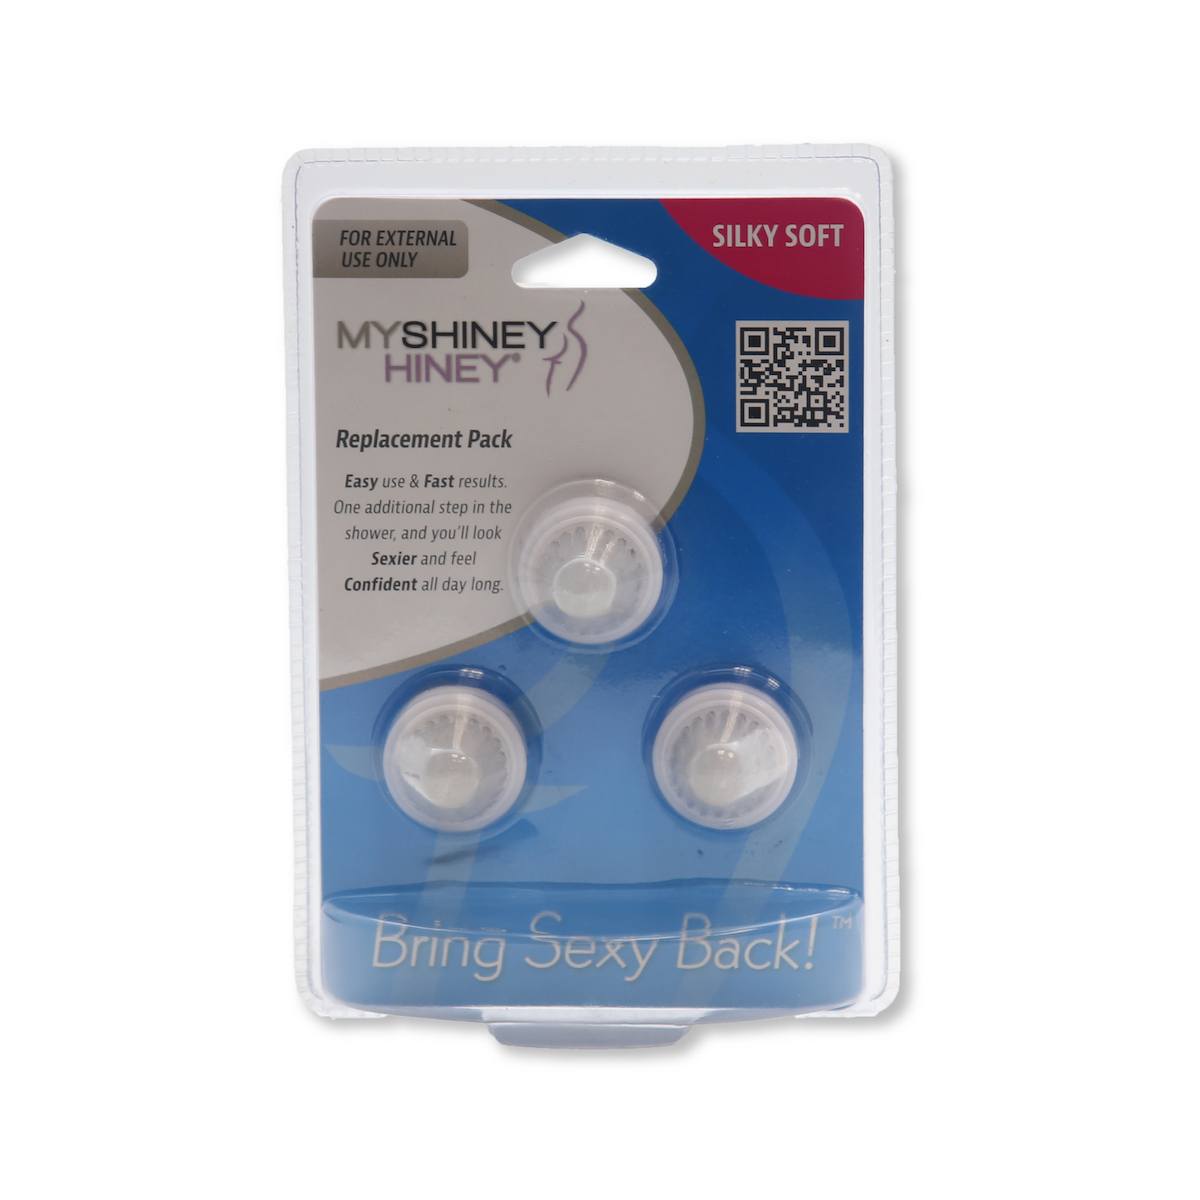 Replacement Heads - My Shiney Hiney Personal Cleansing Kit Silky Soft Replacement Heads (3pk)